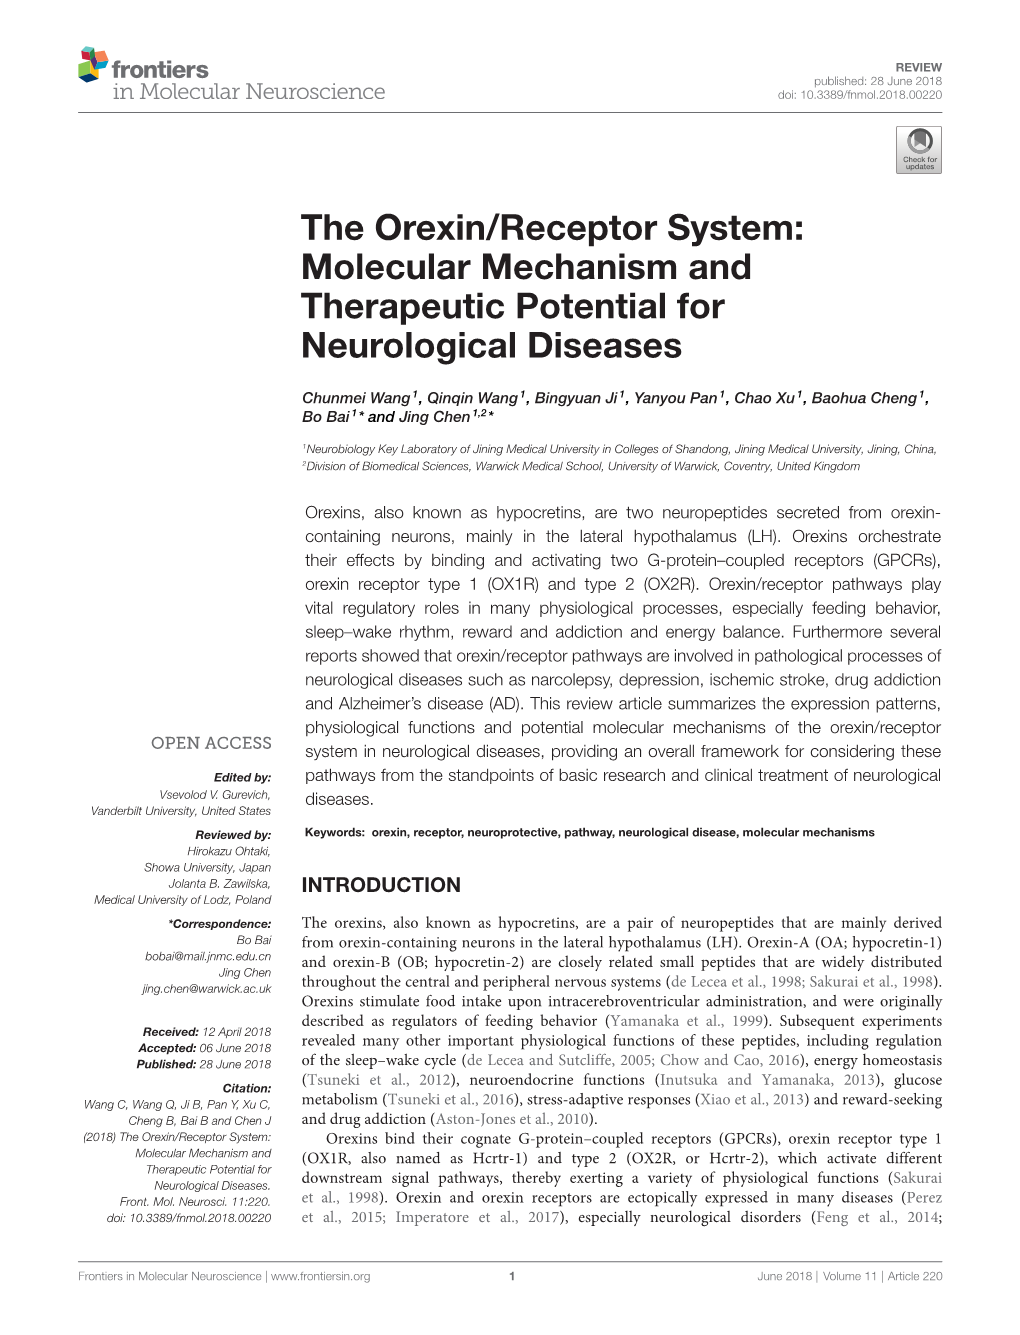 The Orexin/Receptor System: Molecular Mechanism and Therapeutic Potential for Neurological Diseases